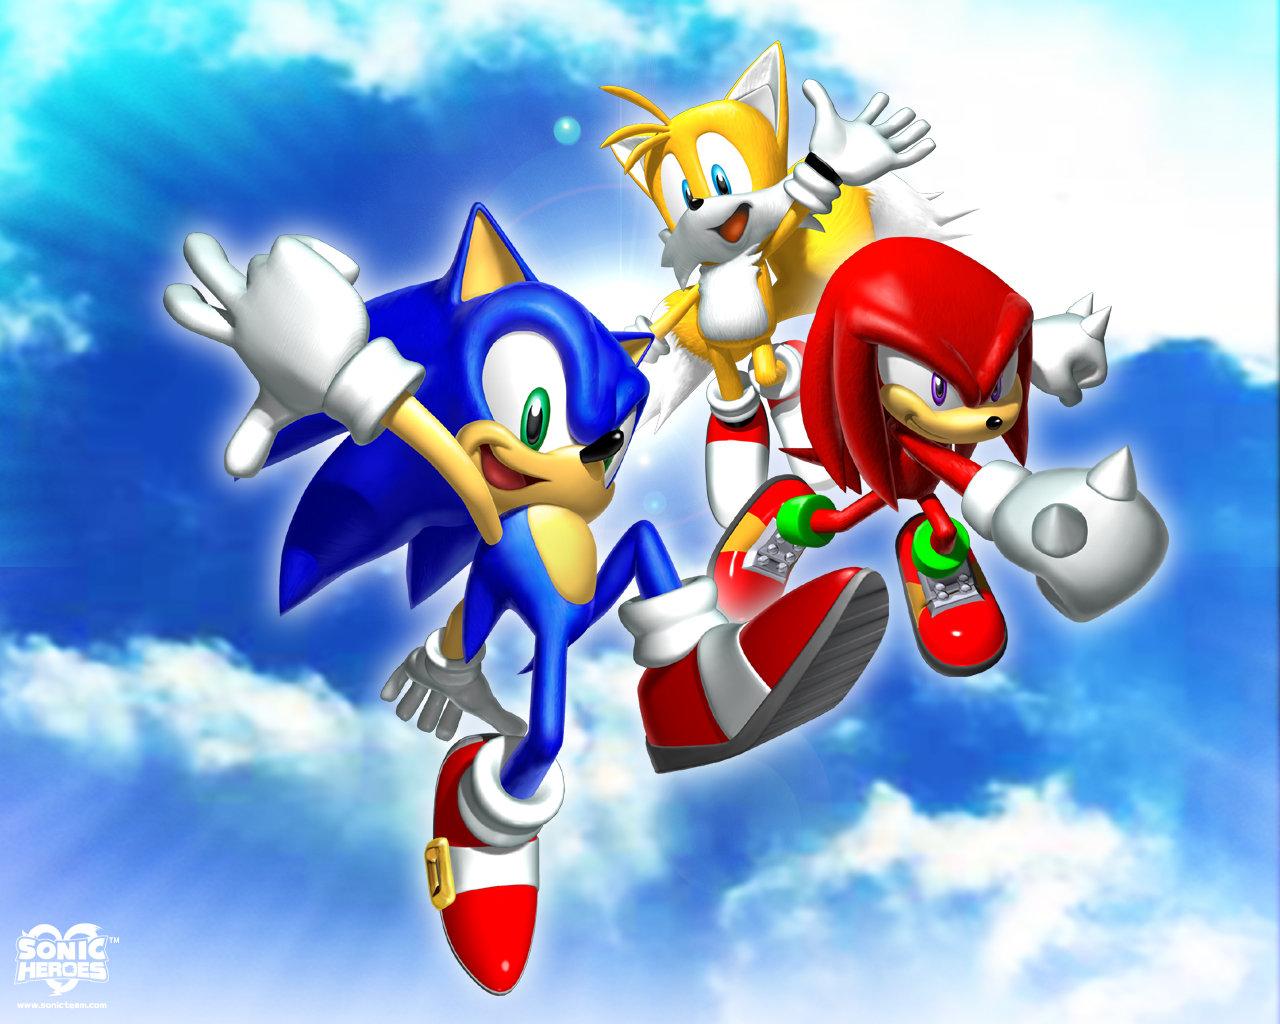 when did sonic heroes come out